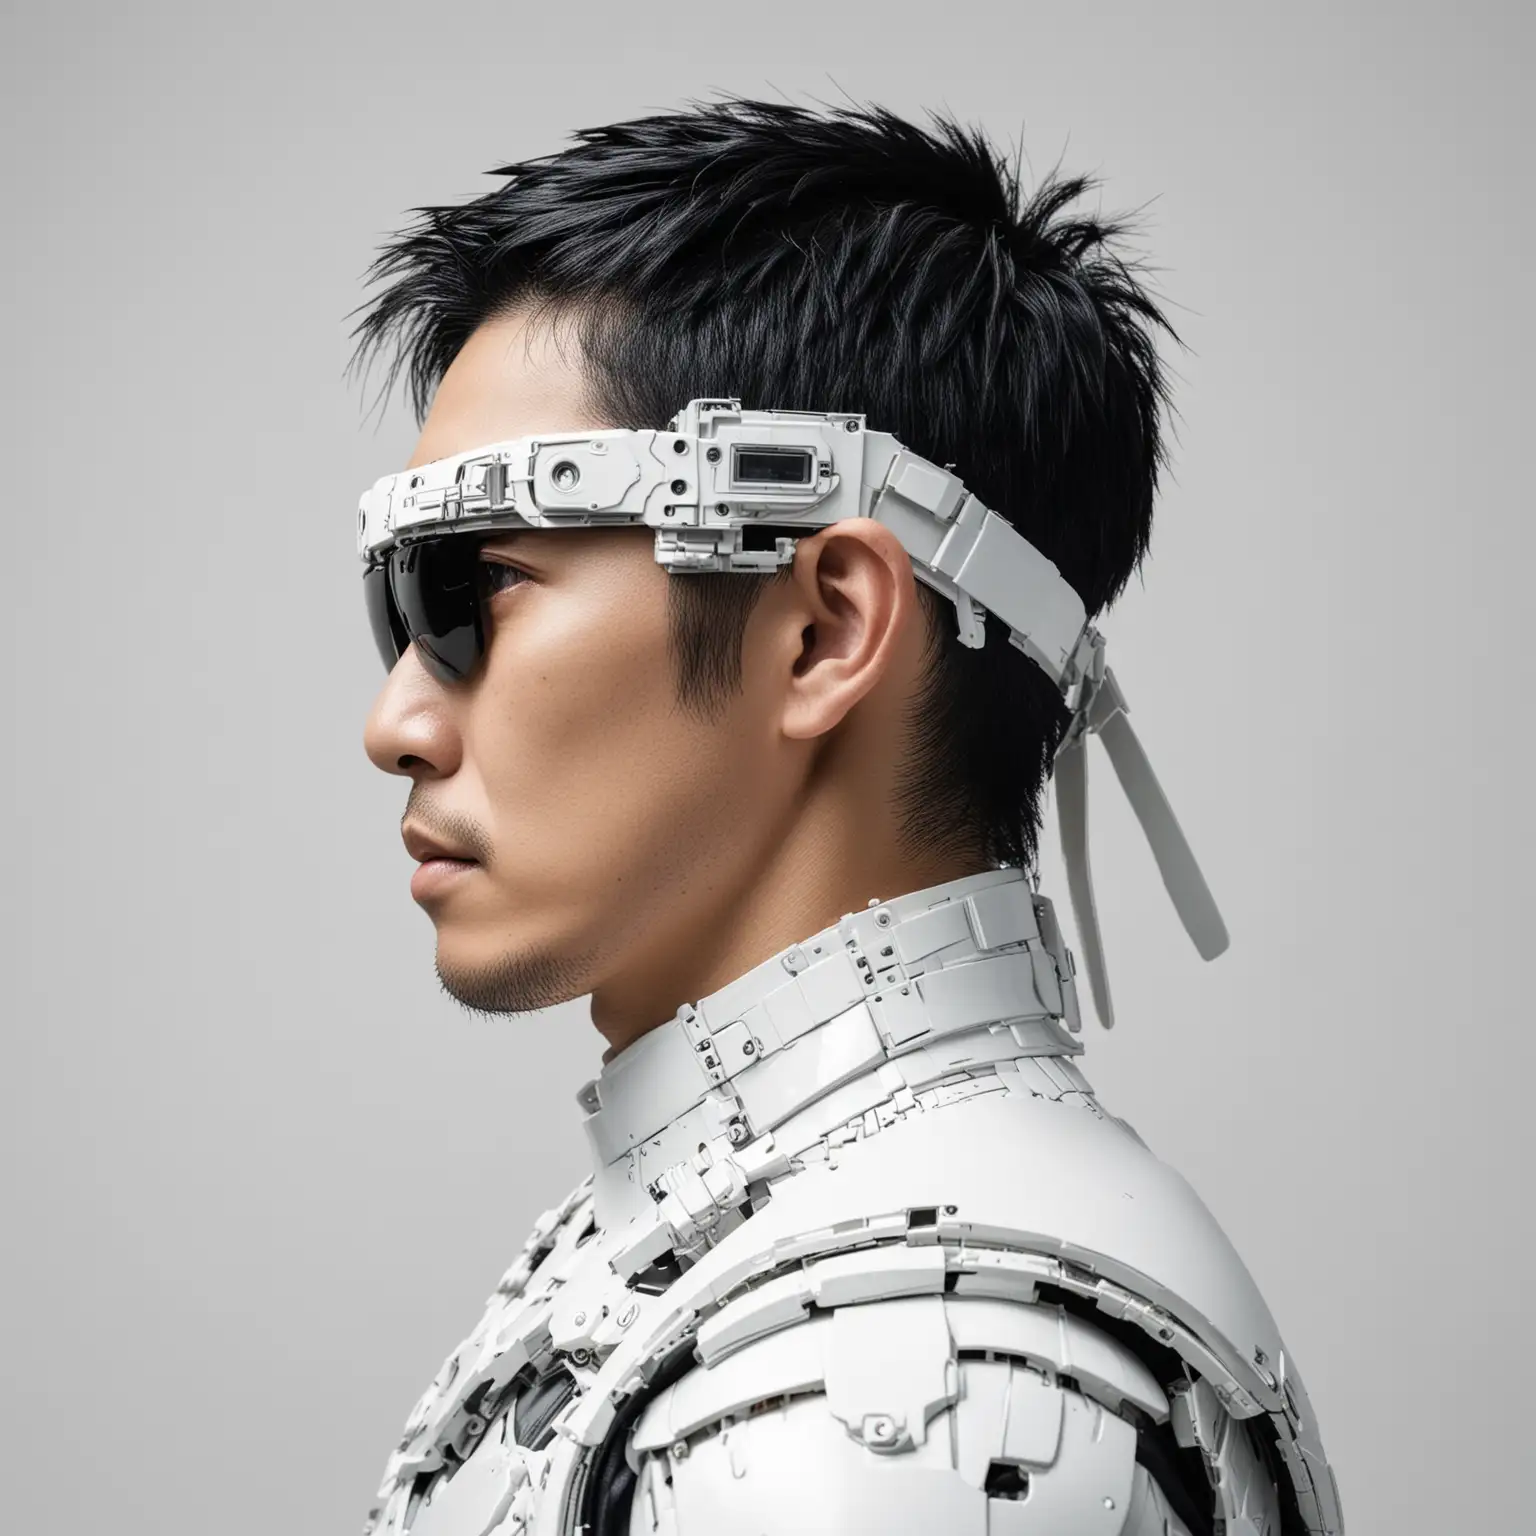 Portrait photograph, side profile view, heroic strong Japanese man with black hair, white bionic eye, white background